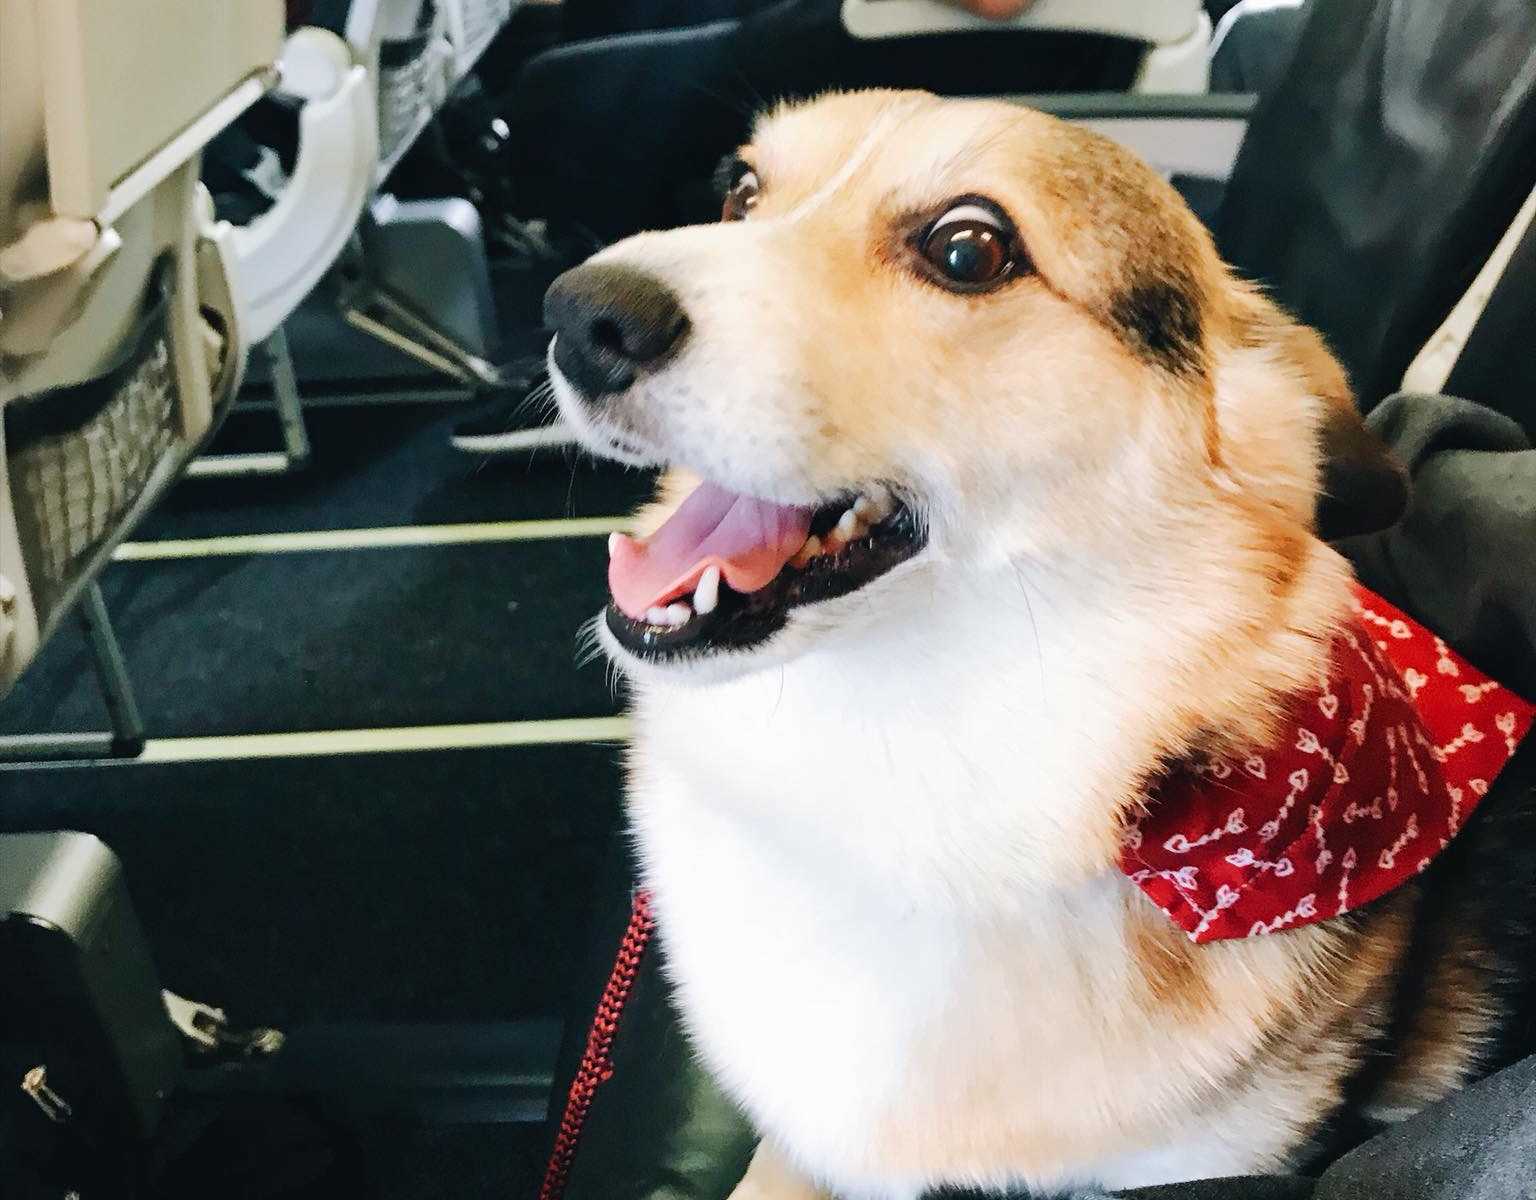 dog with red bandana on sitting on airplane seat with mouth open